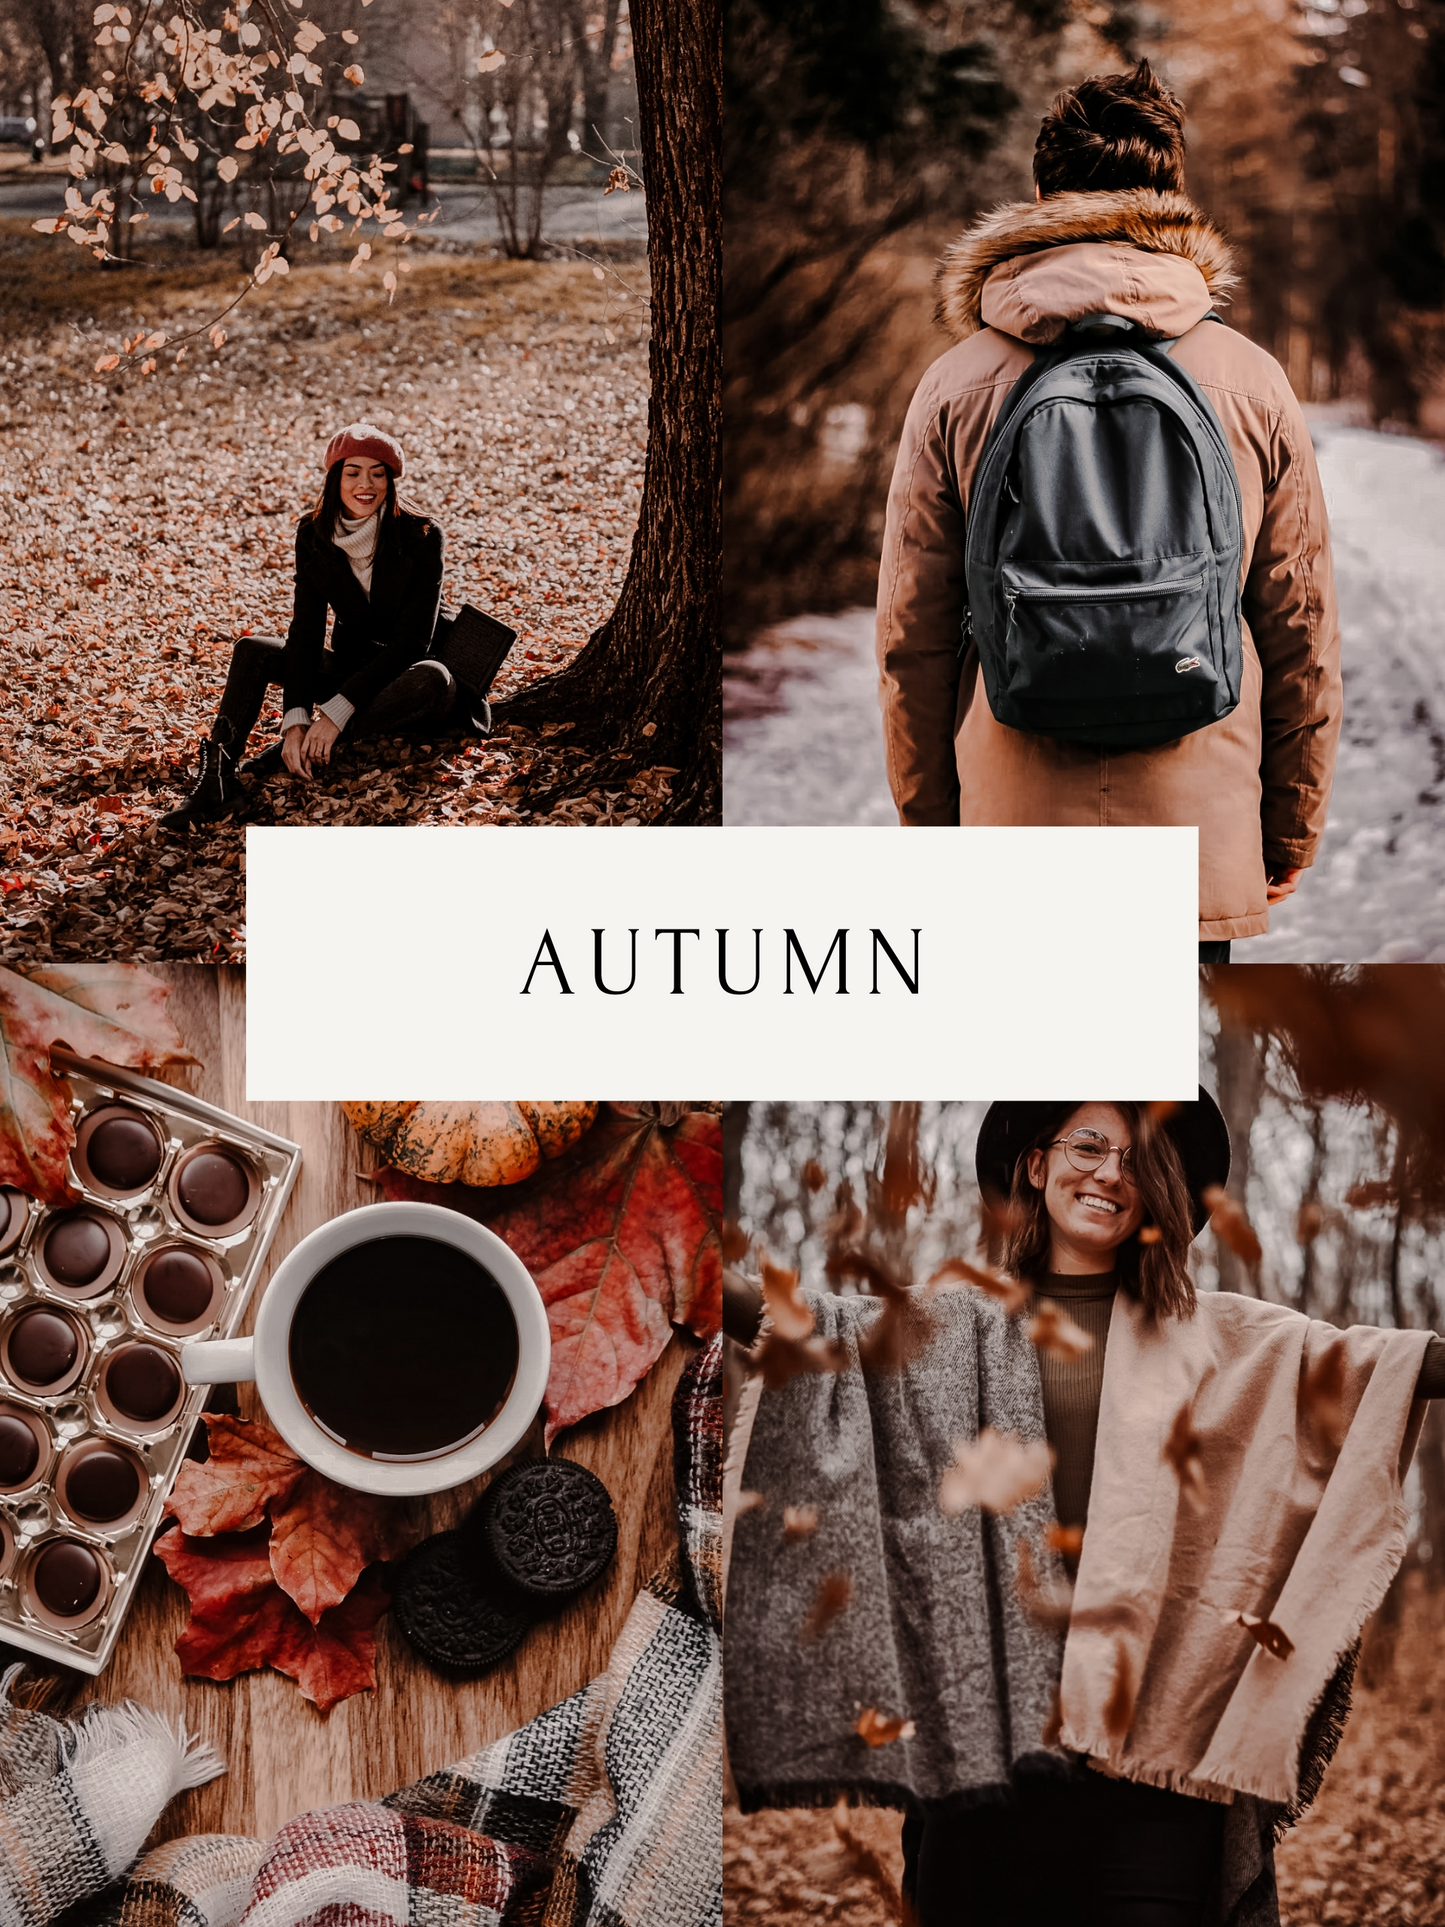 Autumn - One Click Filter